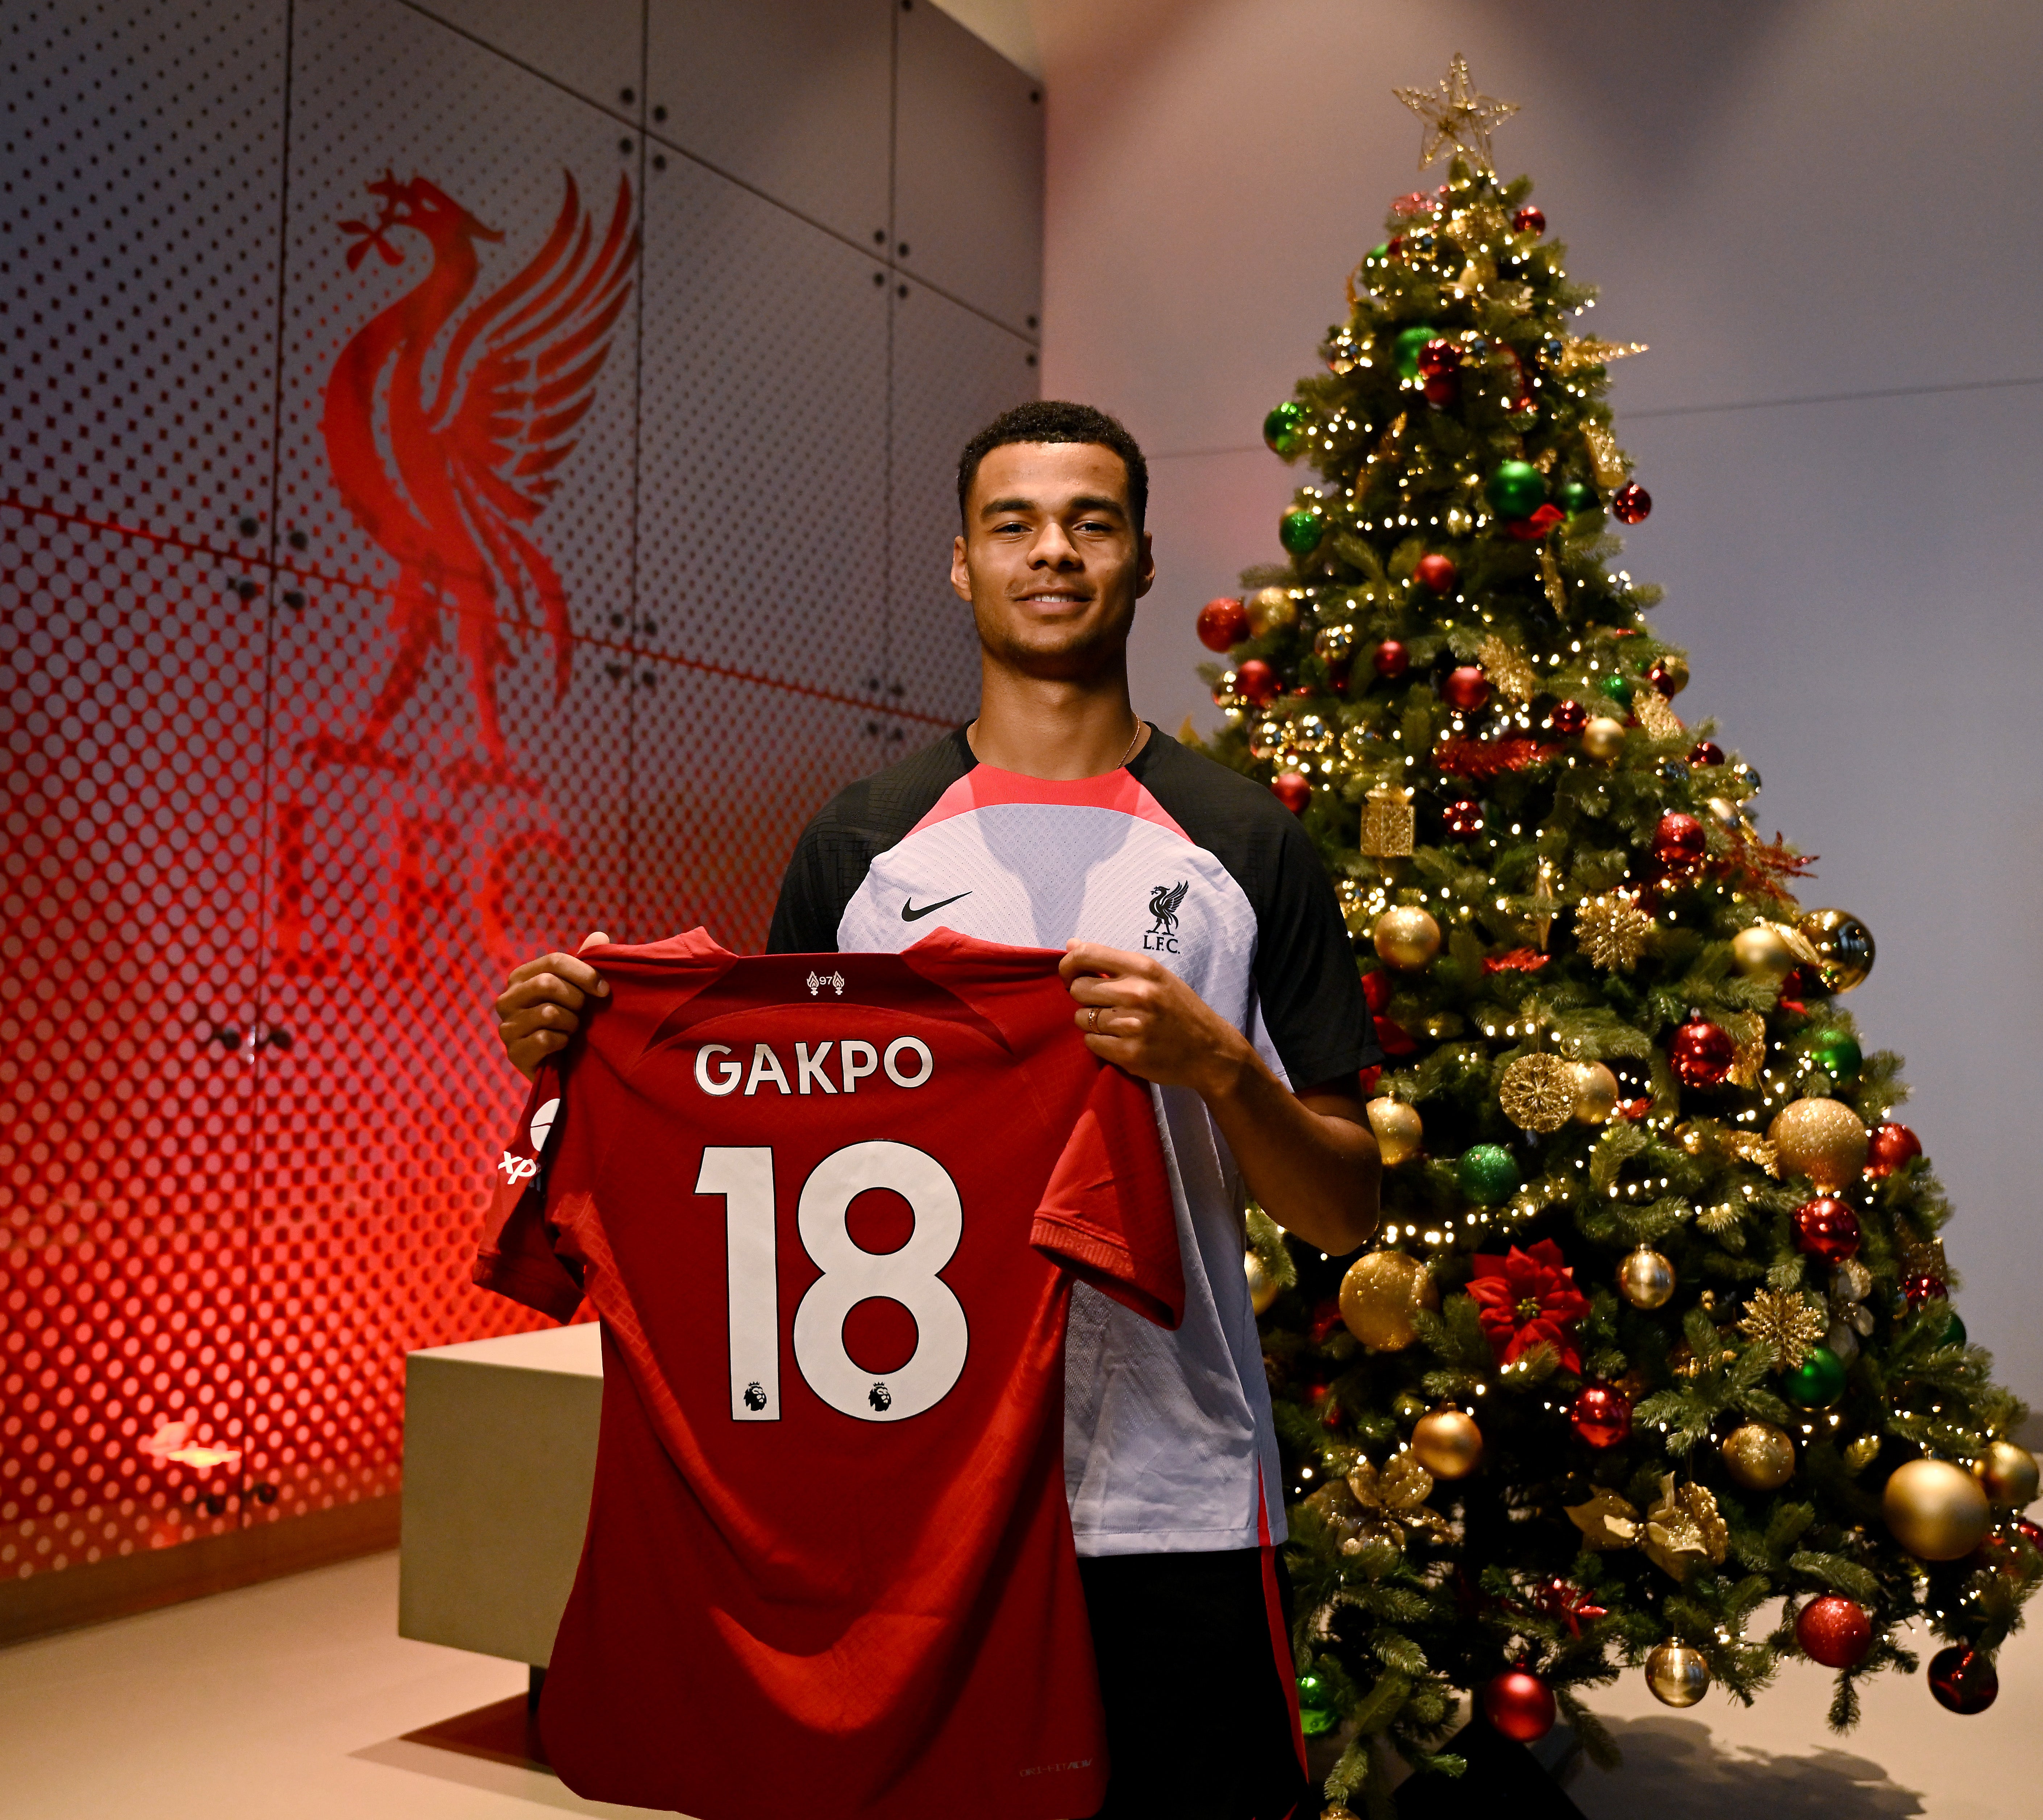 Cody Gakpo poses with the Liverpool shirt